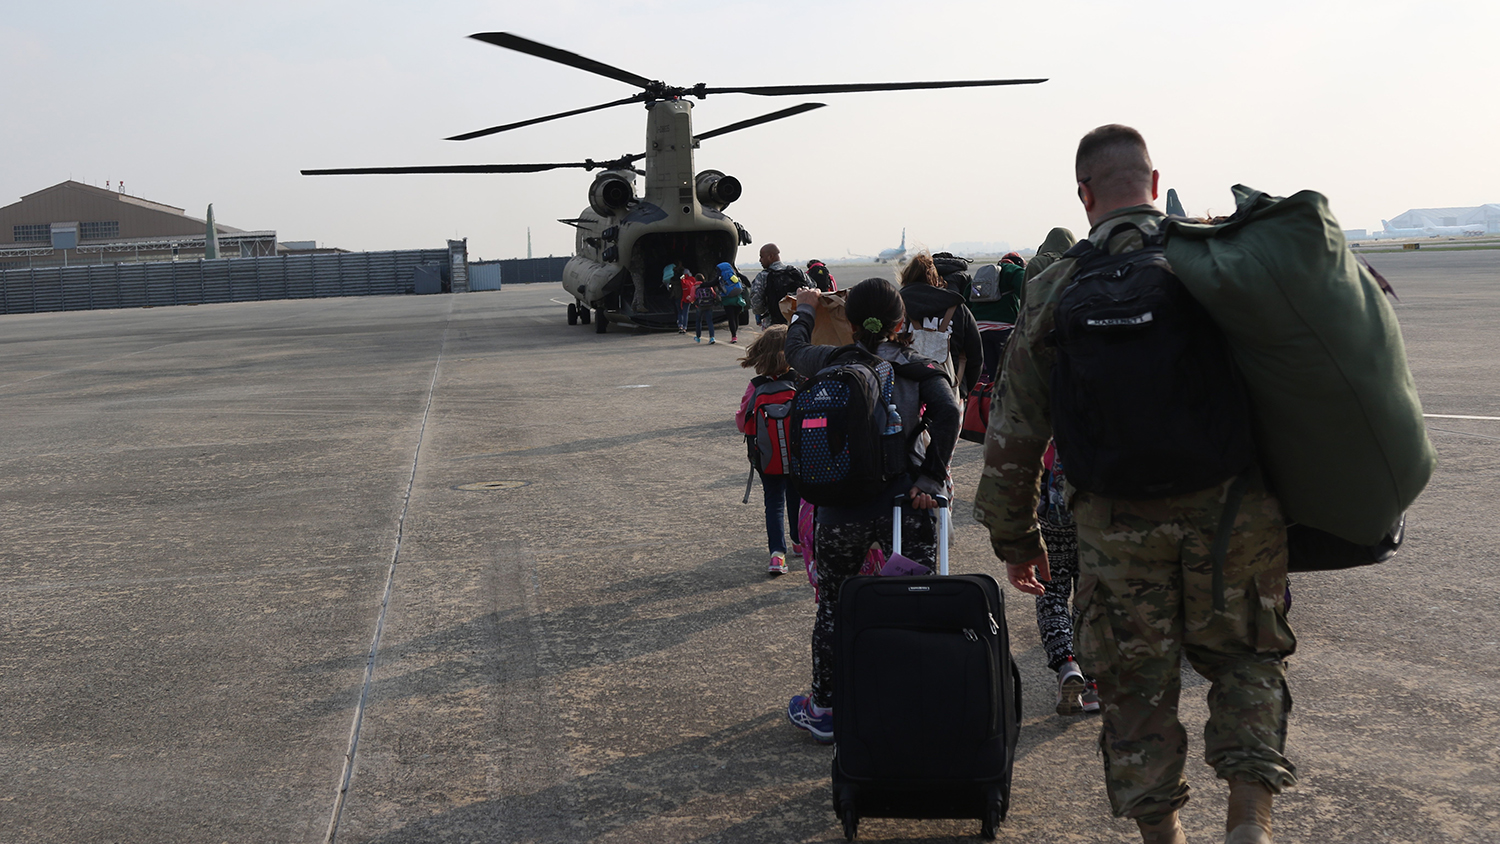 noncombatants boarding a military transport helicopter